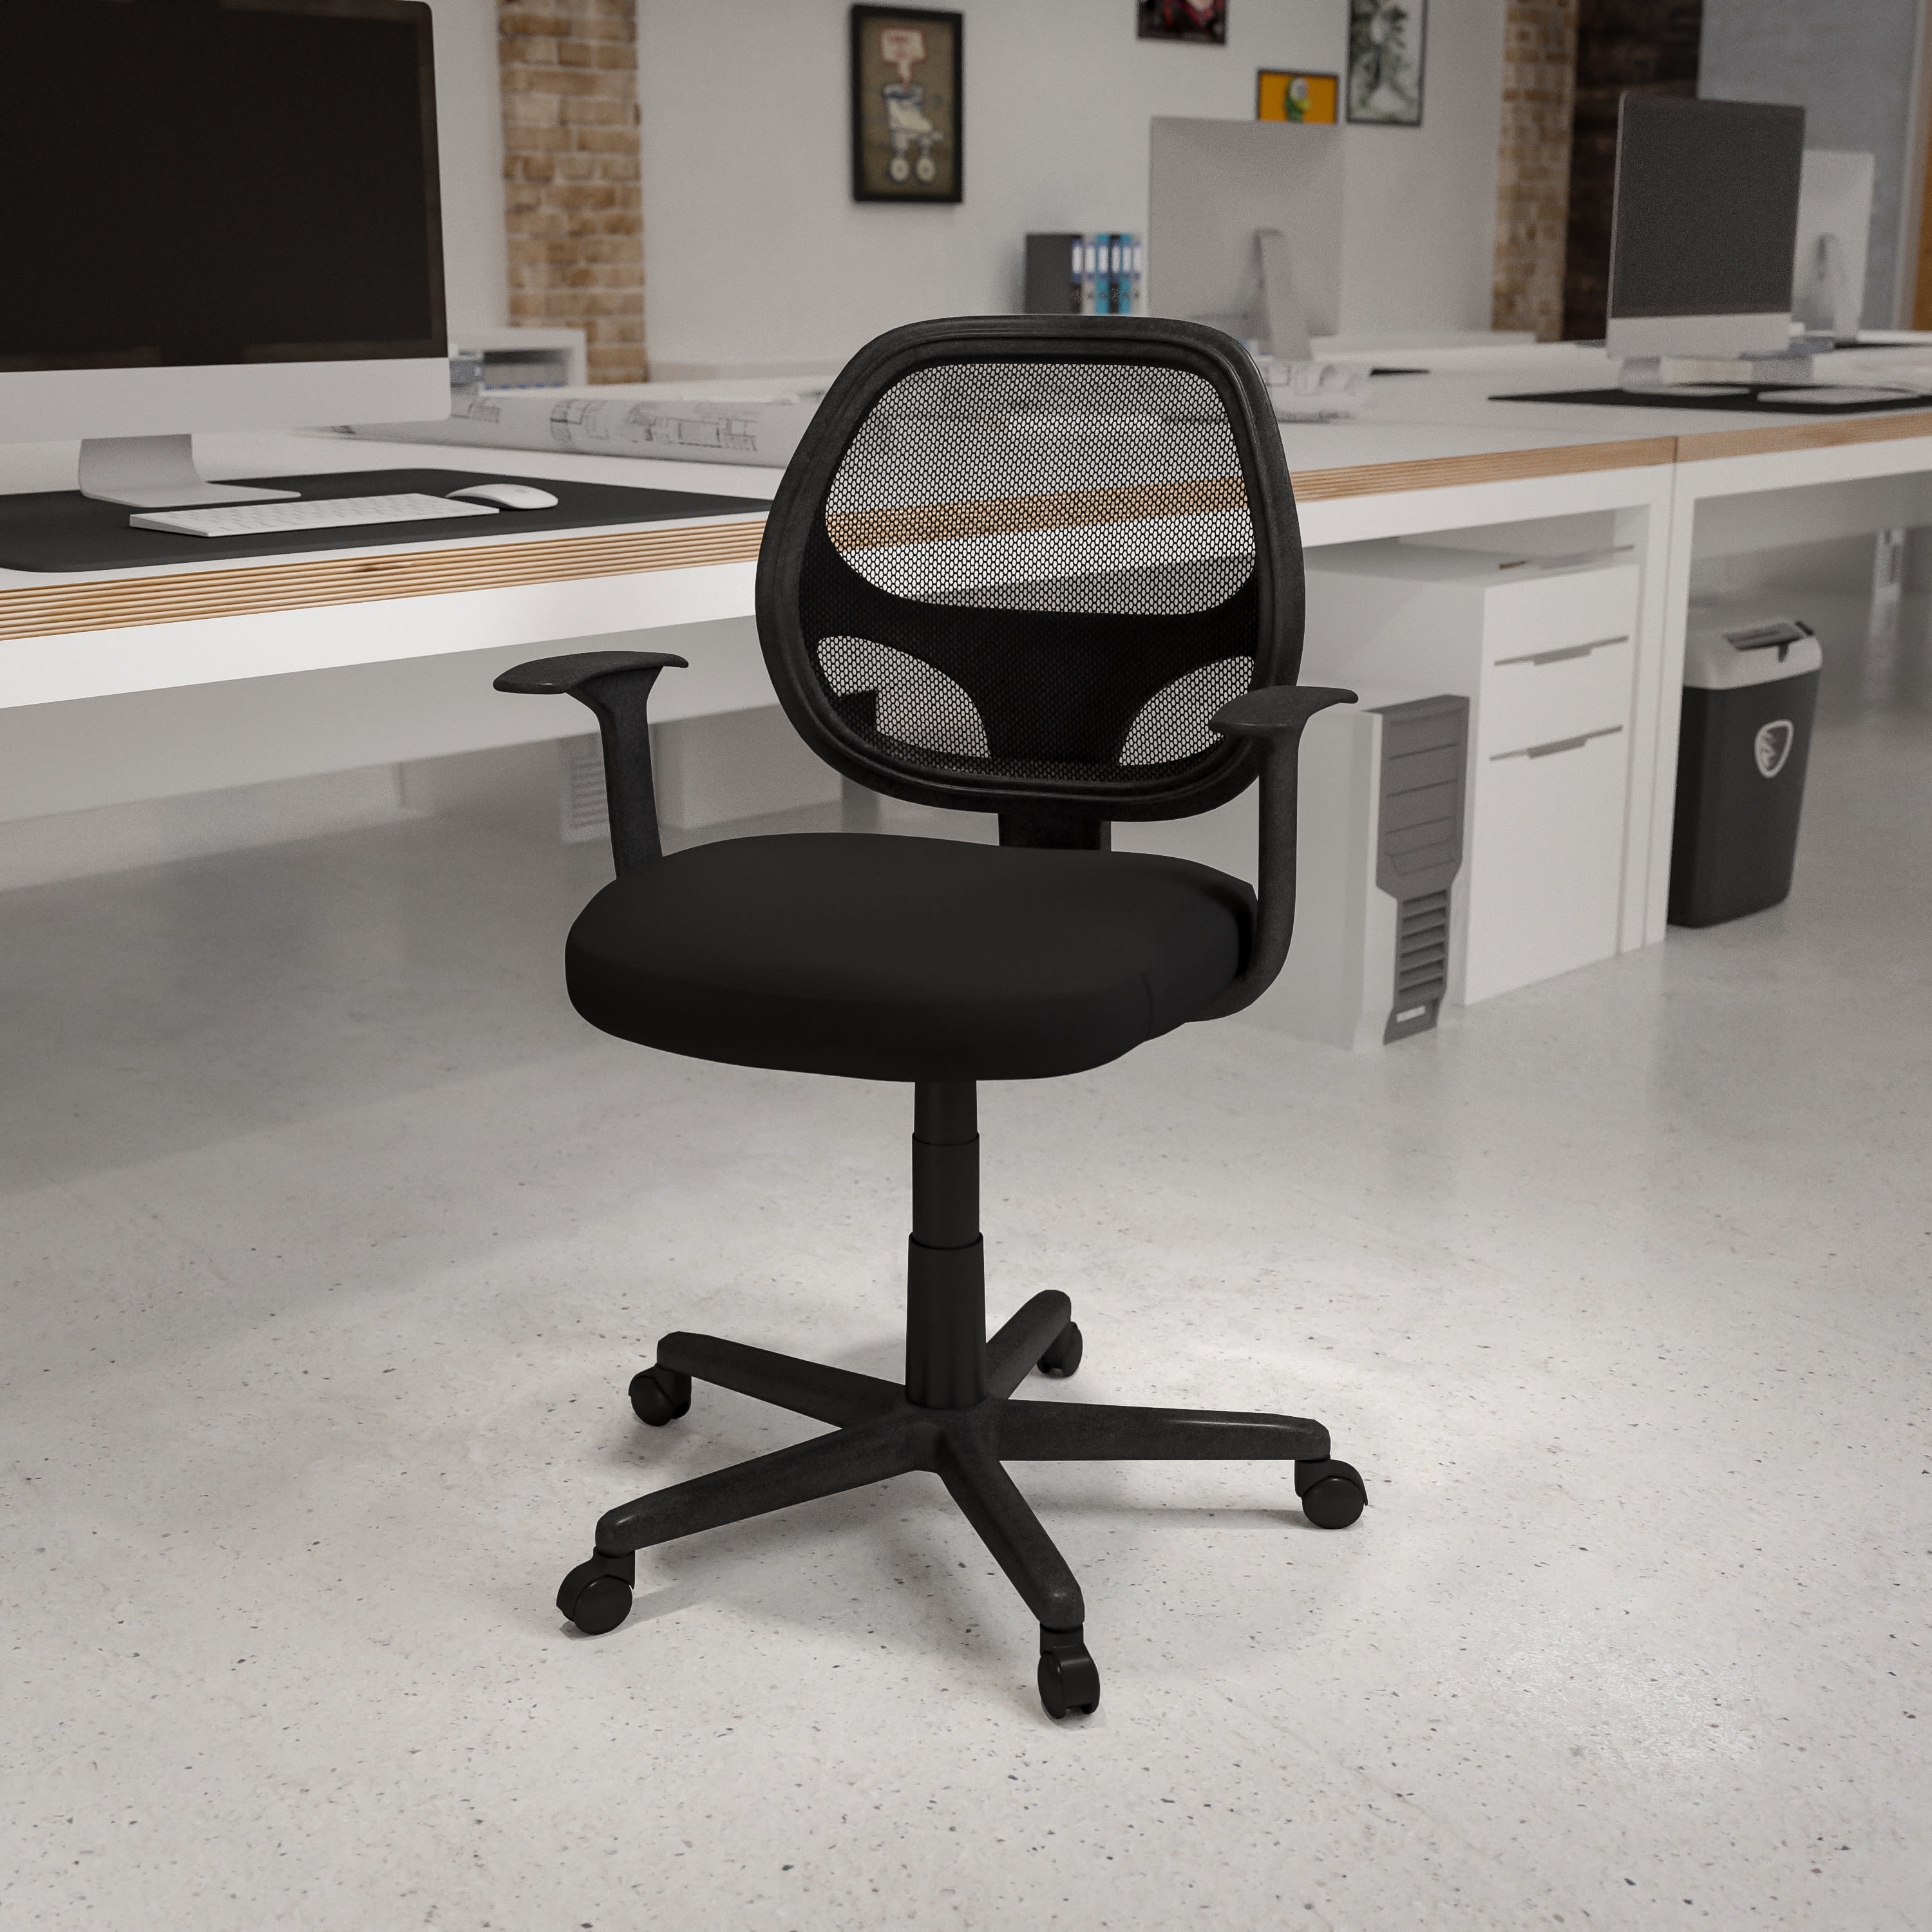 Swivel Home Office Chair Ergonomic Executive Computer Desk Seat Task Mesh Chairs for sale online 